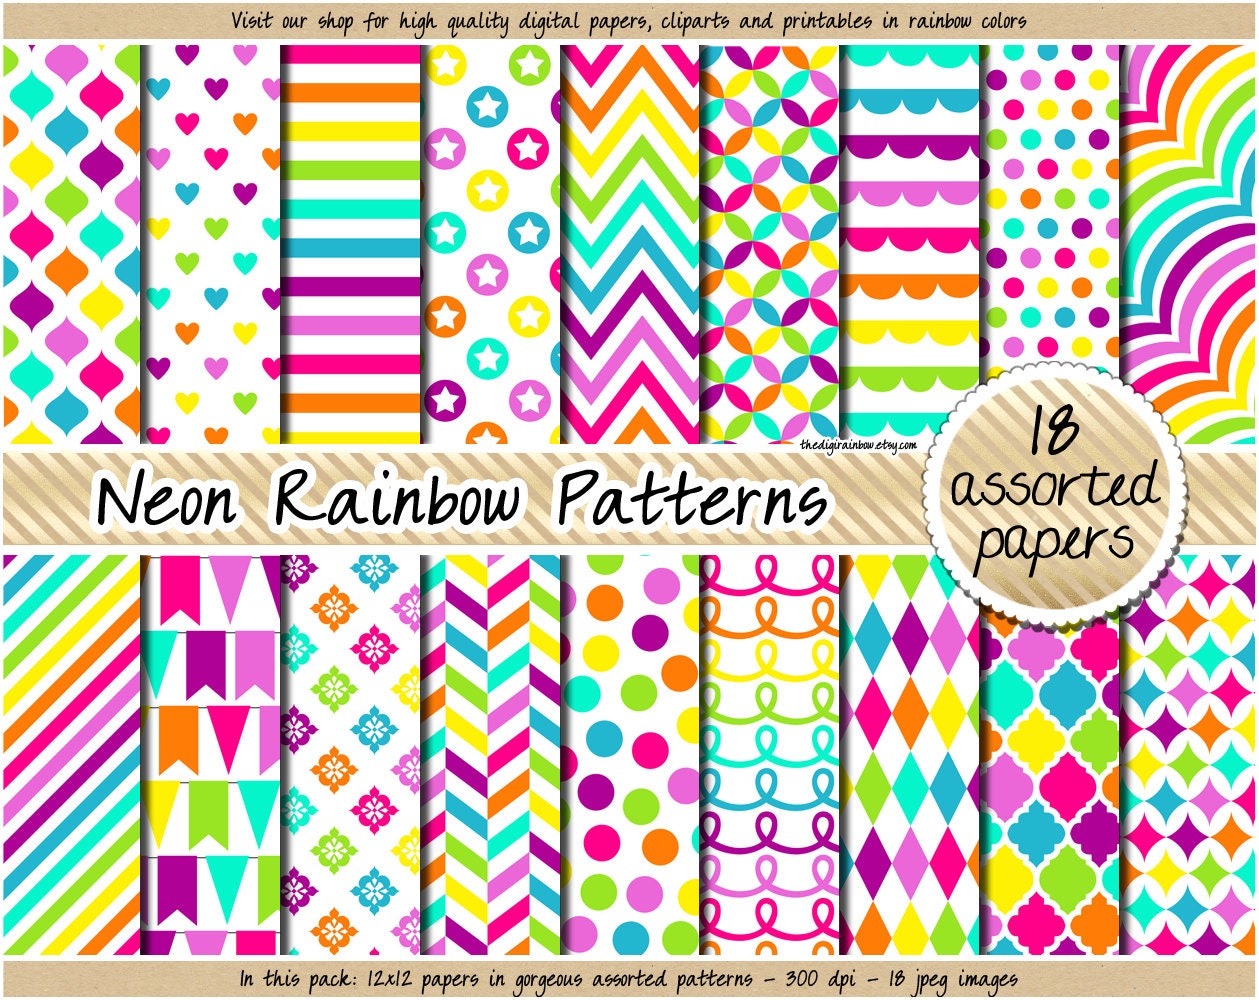 Pastel Digital Paper: Pastel Colored Paper With Chevrons Polkadots